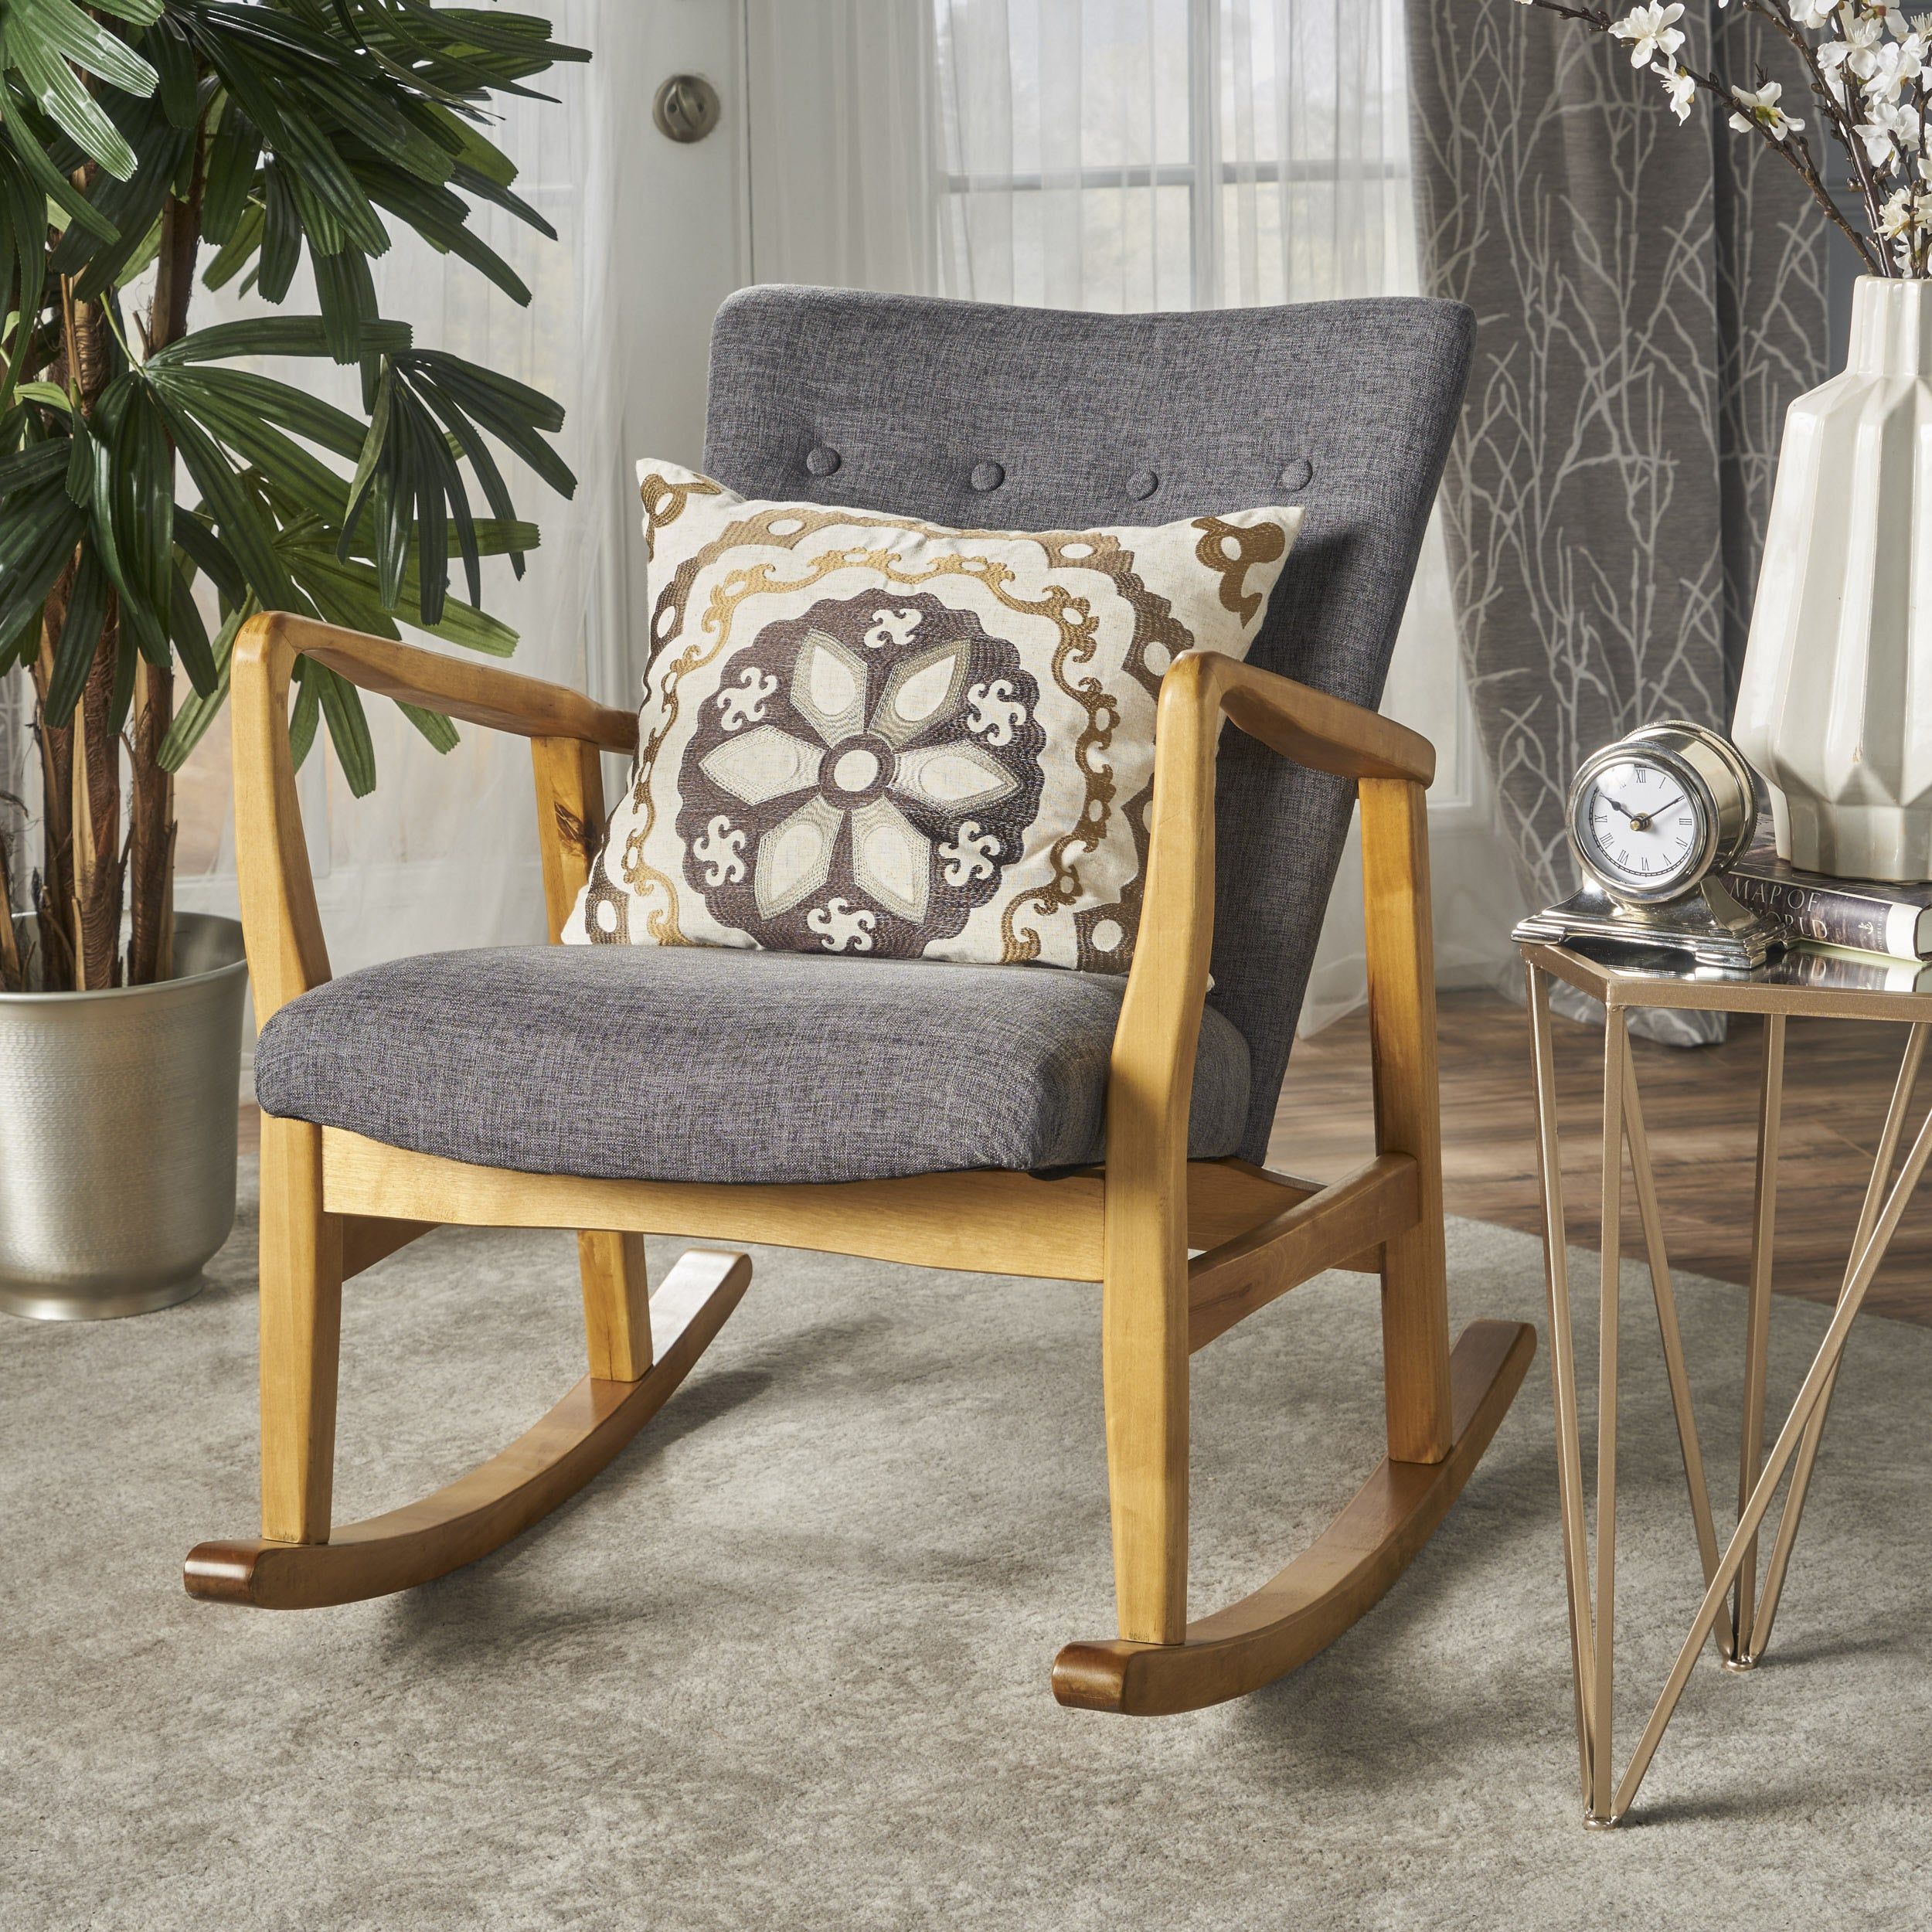 Rocking Chairs, Fabric Living Room Chairs | Shop Online At With Judson Traditional Rocking Chairs (View 10 of 20)